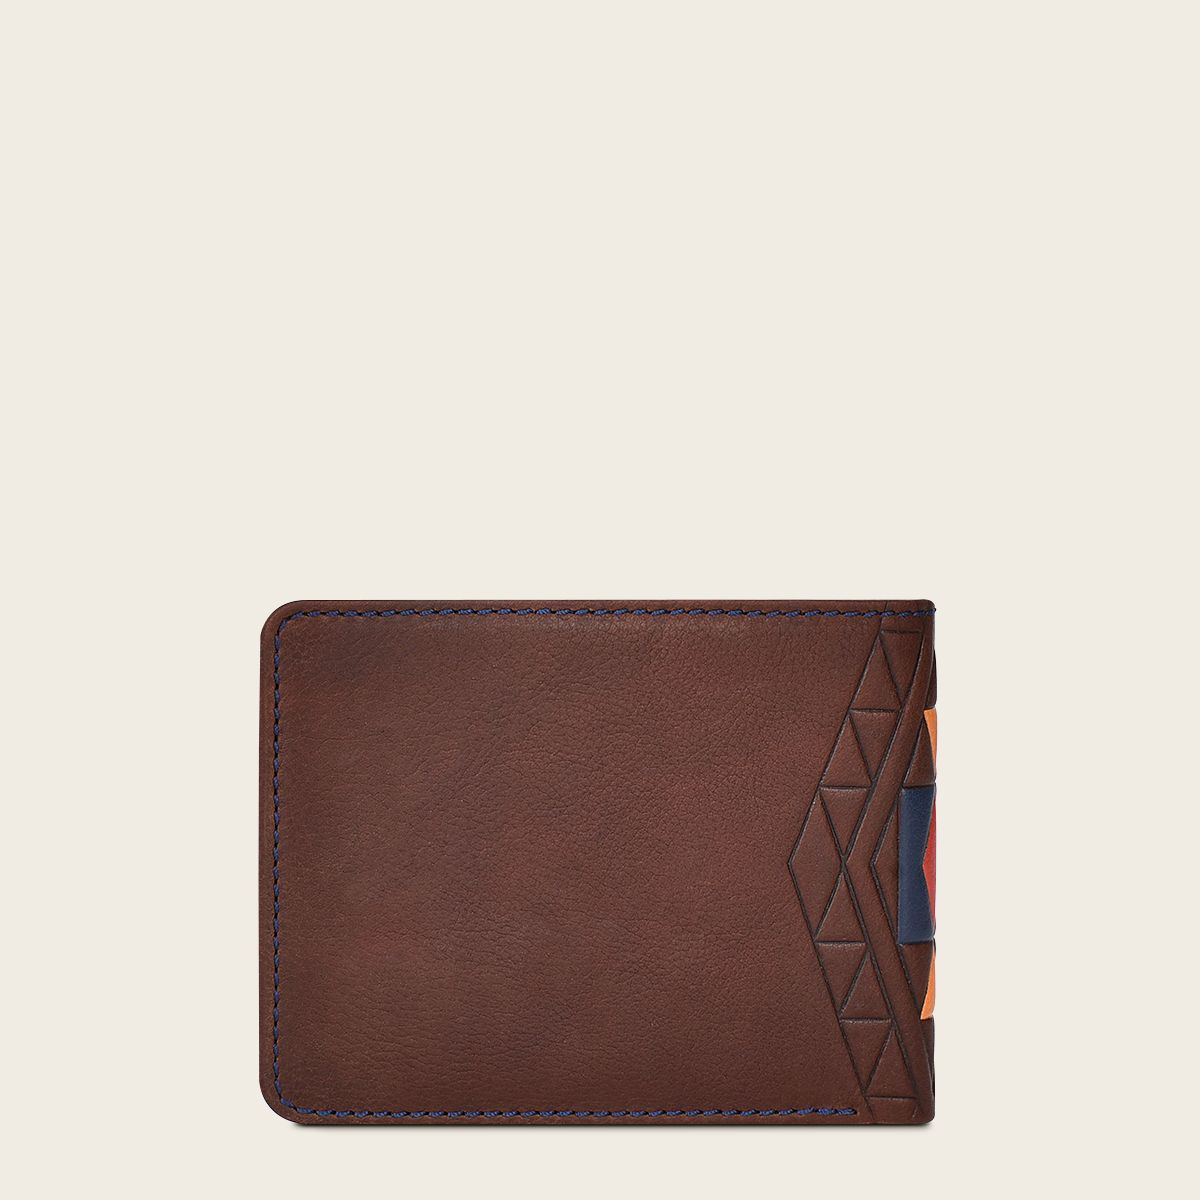 Brown bovine leather wallet with contrasting color details